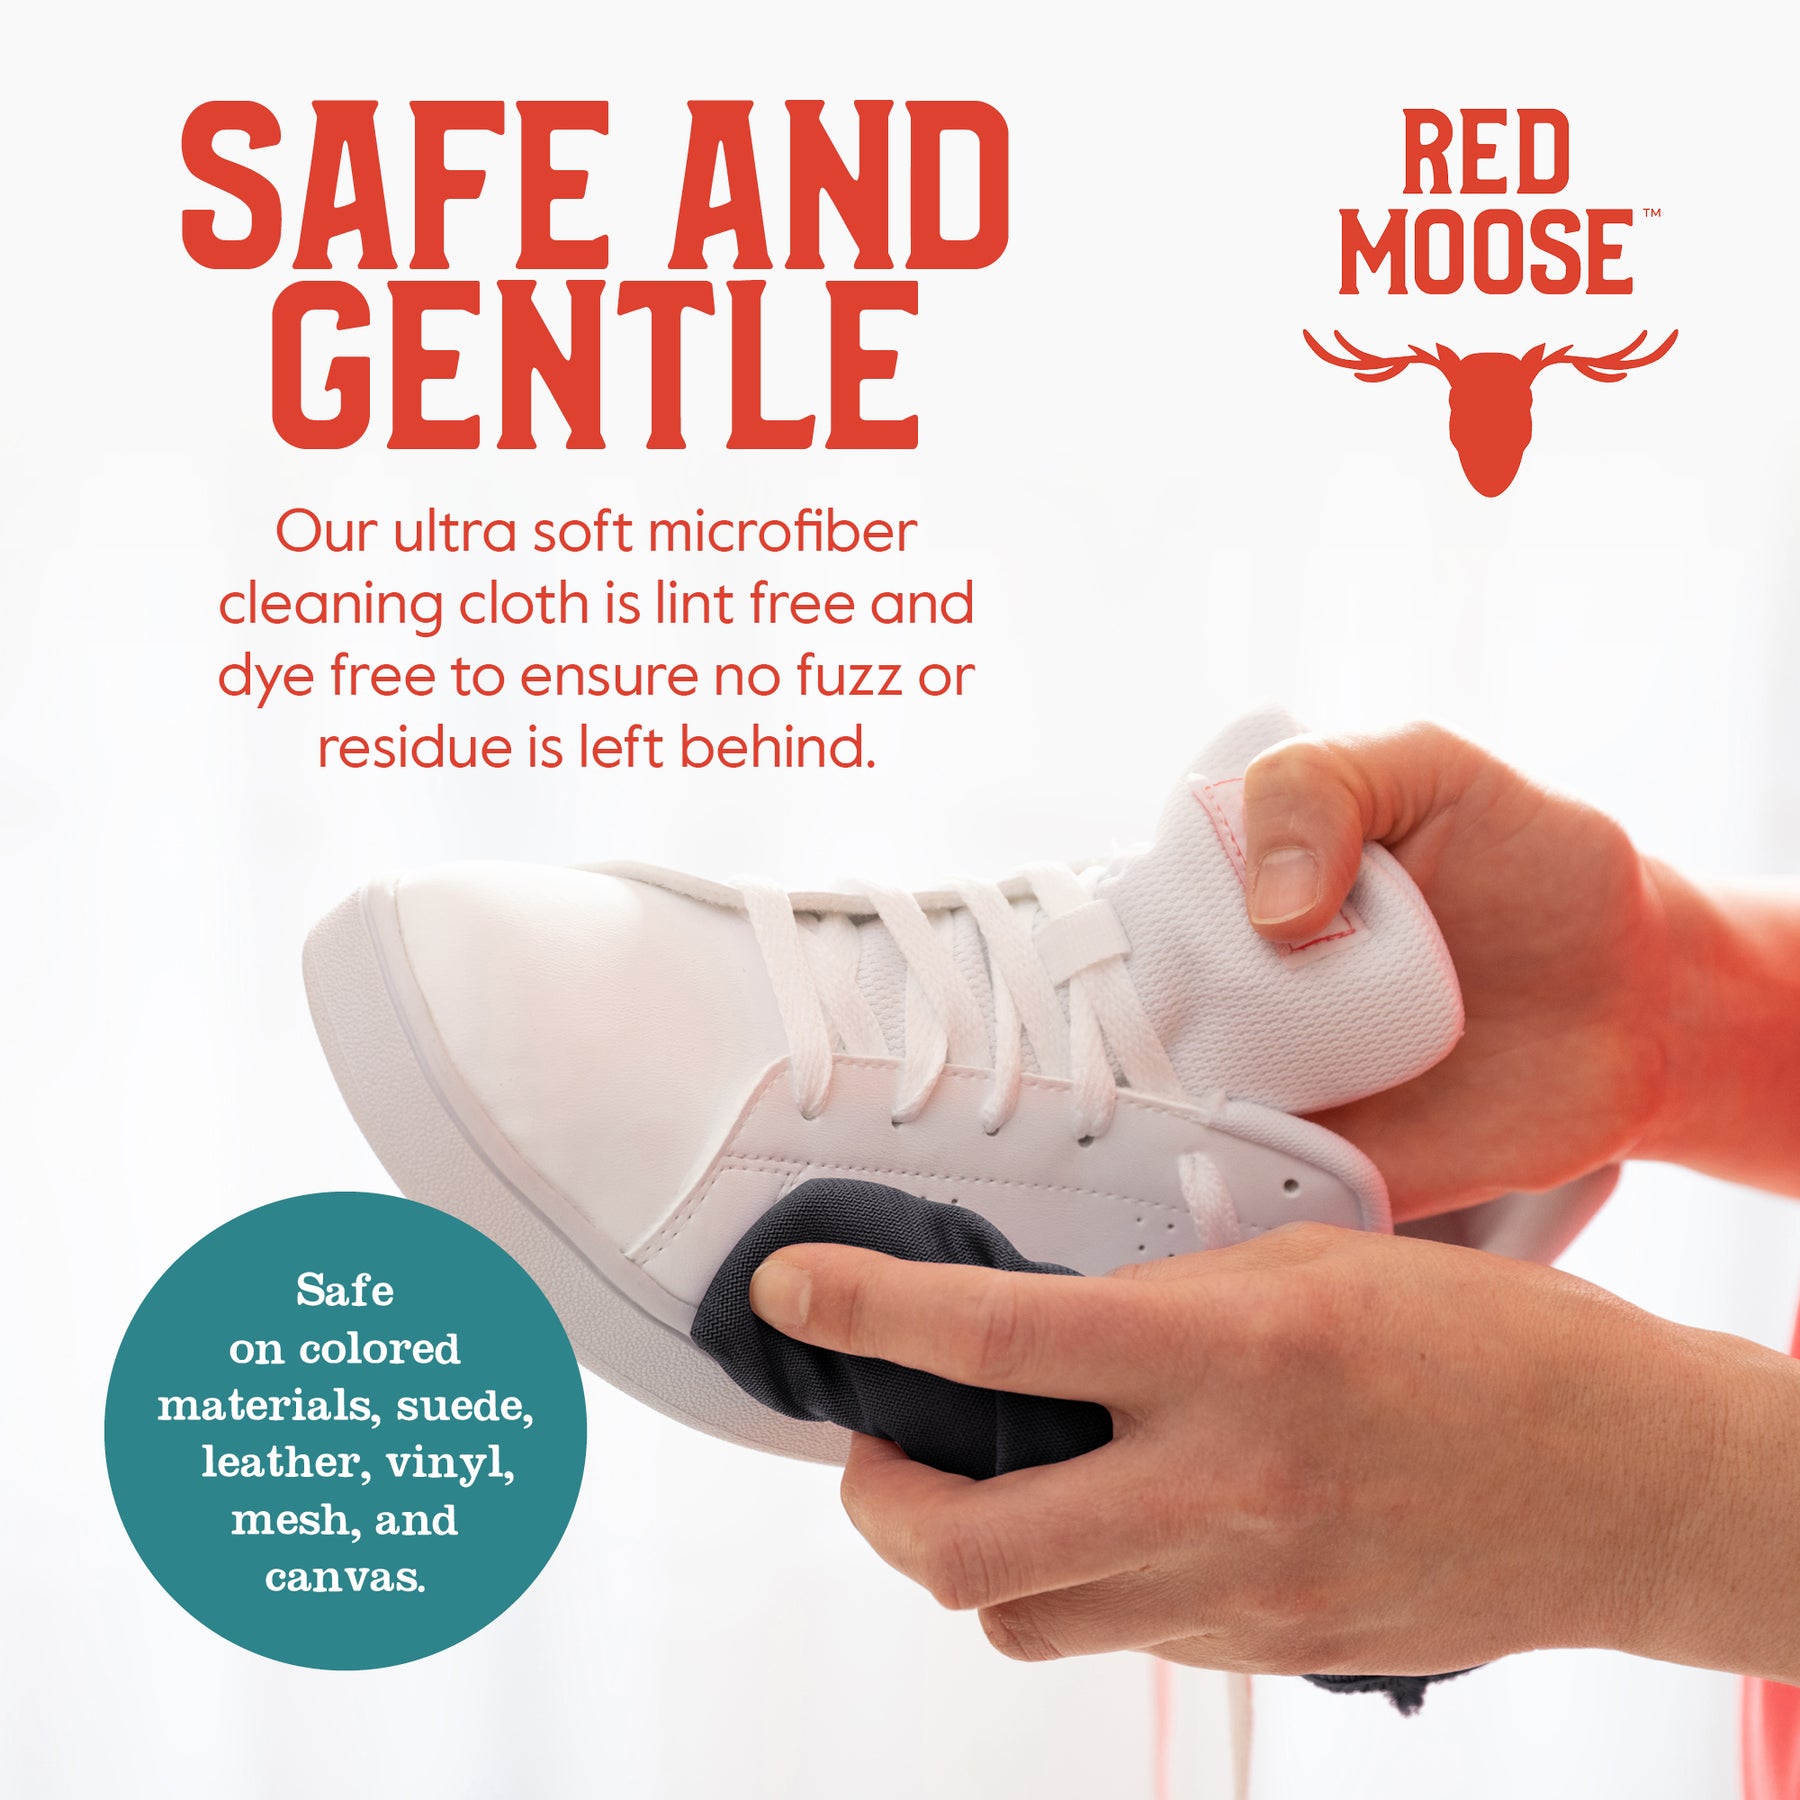 Red Moose Golf Shoe Cleaning Kit